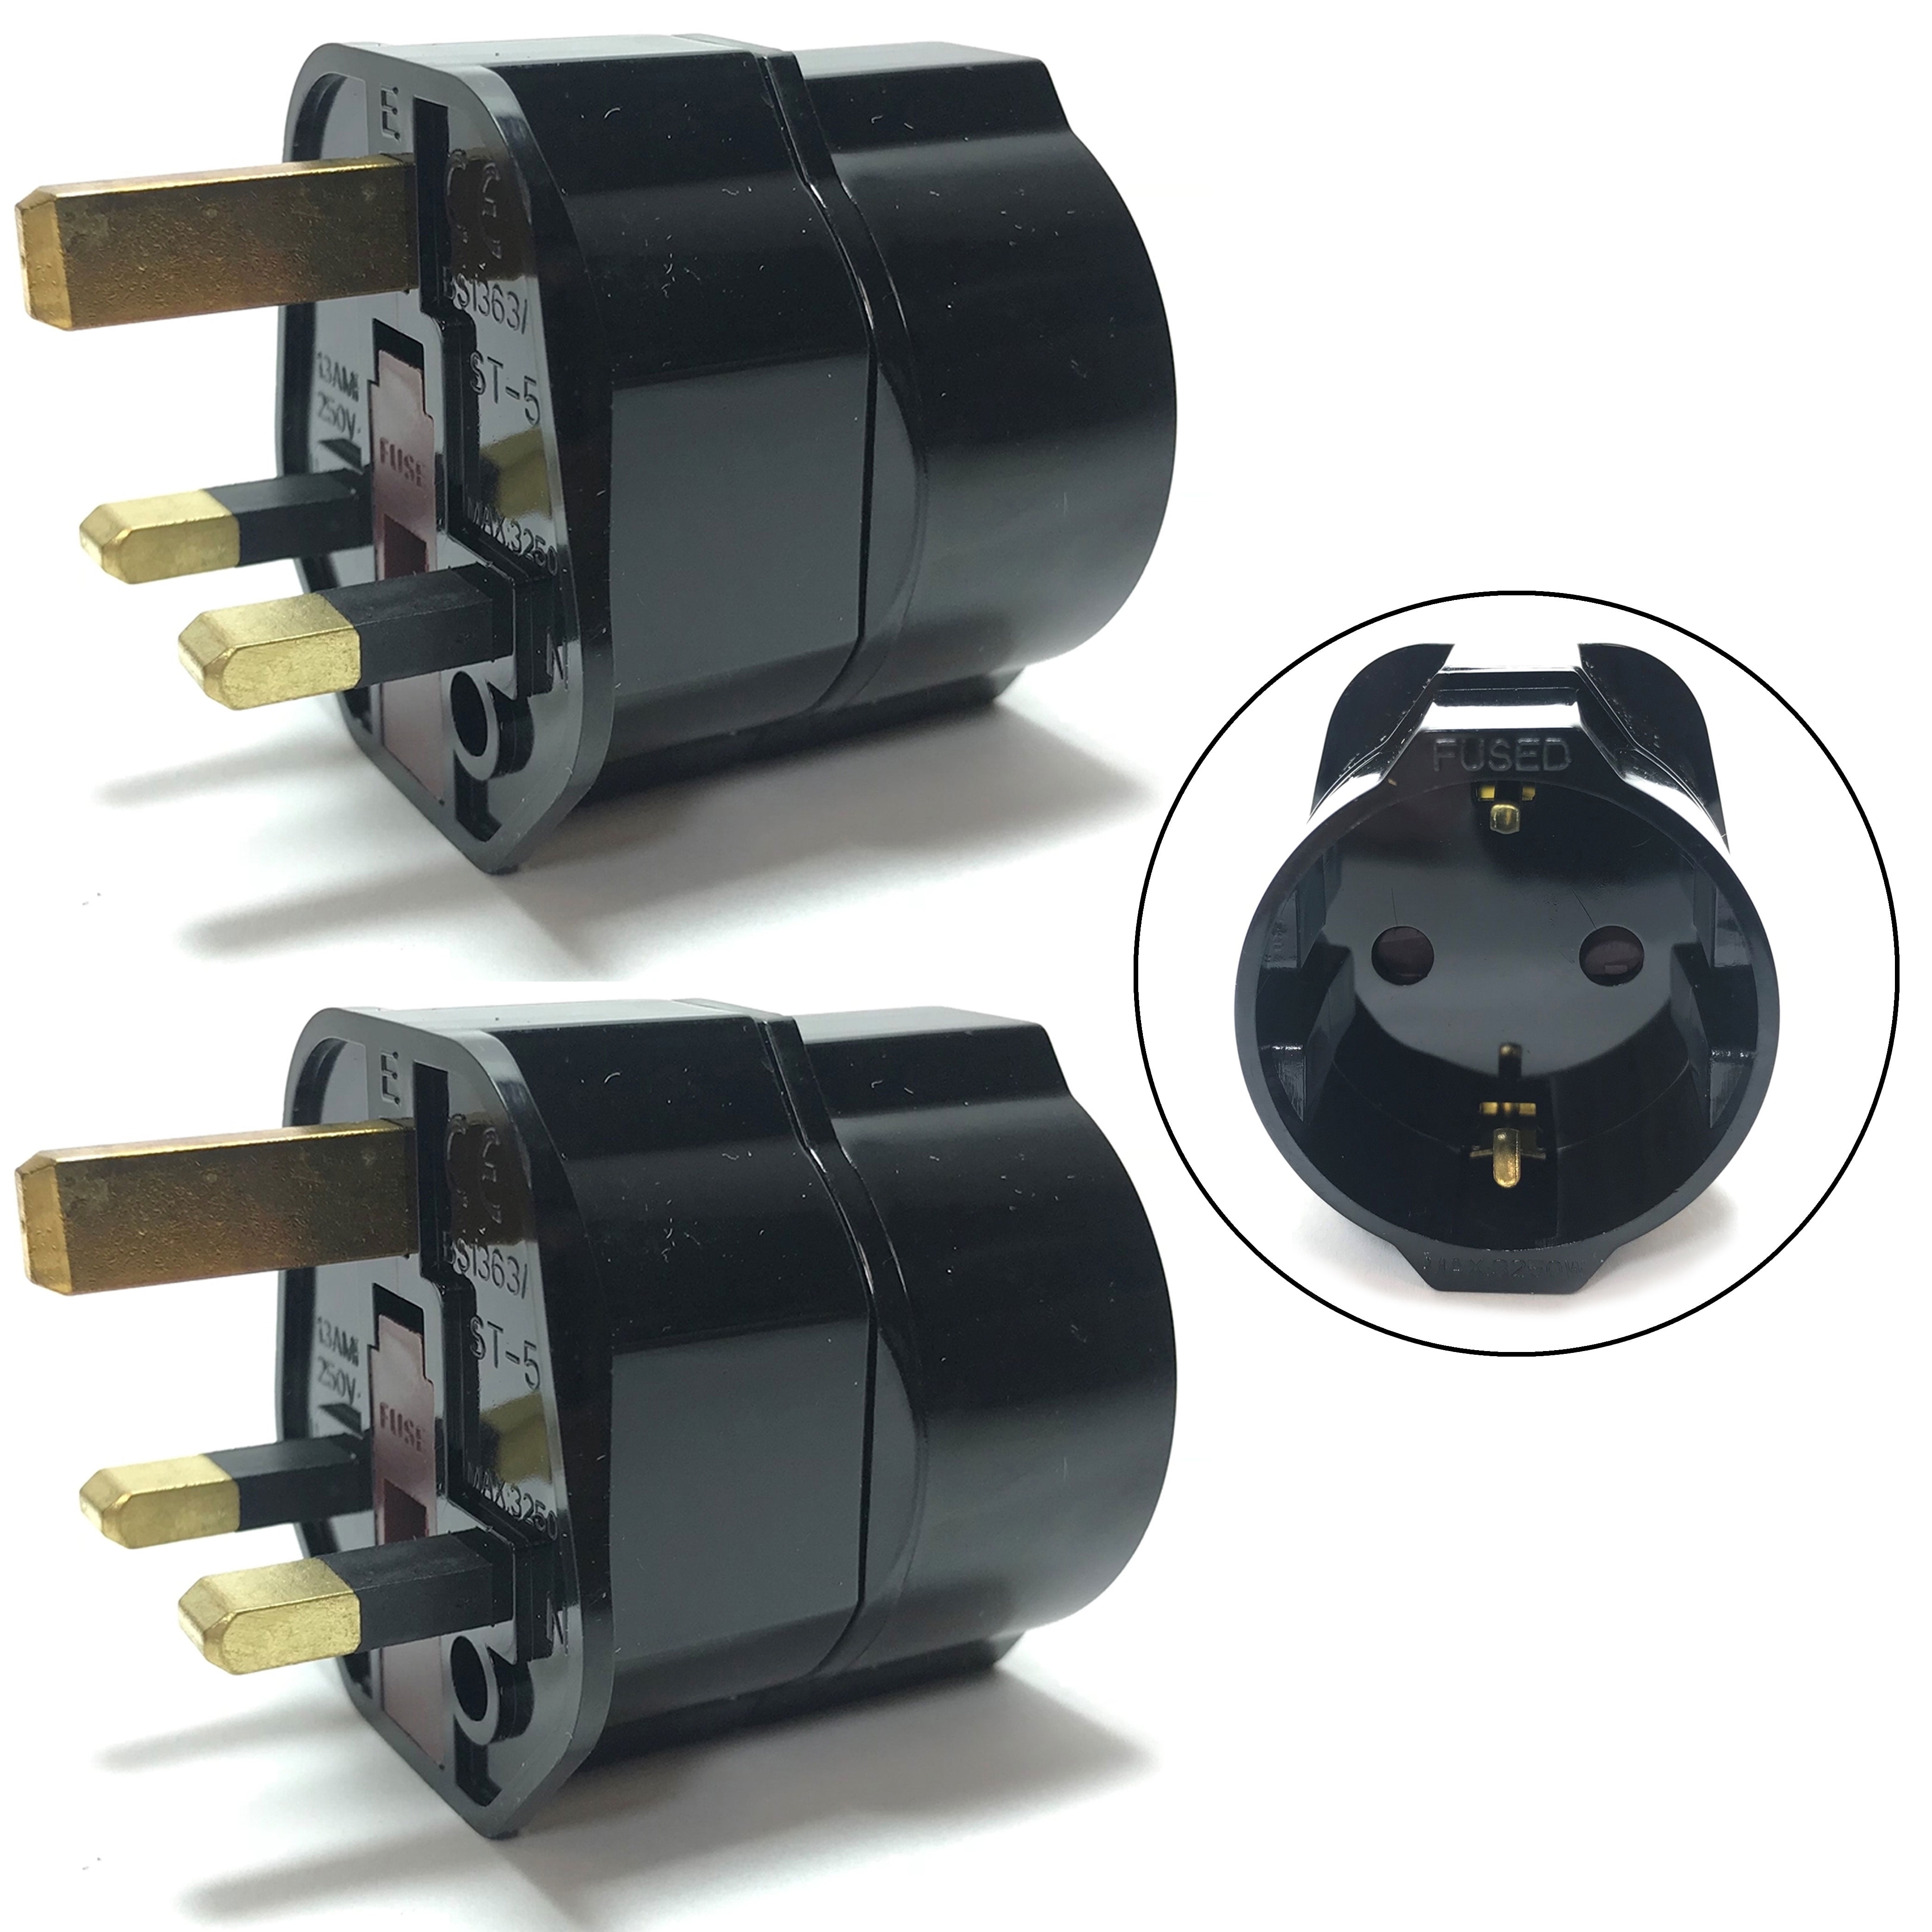 2 x Quality 3 Pin Travel Plug Adaptor 13 Amp Safety Tested Europe to UK 